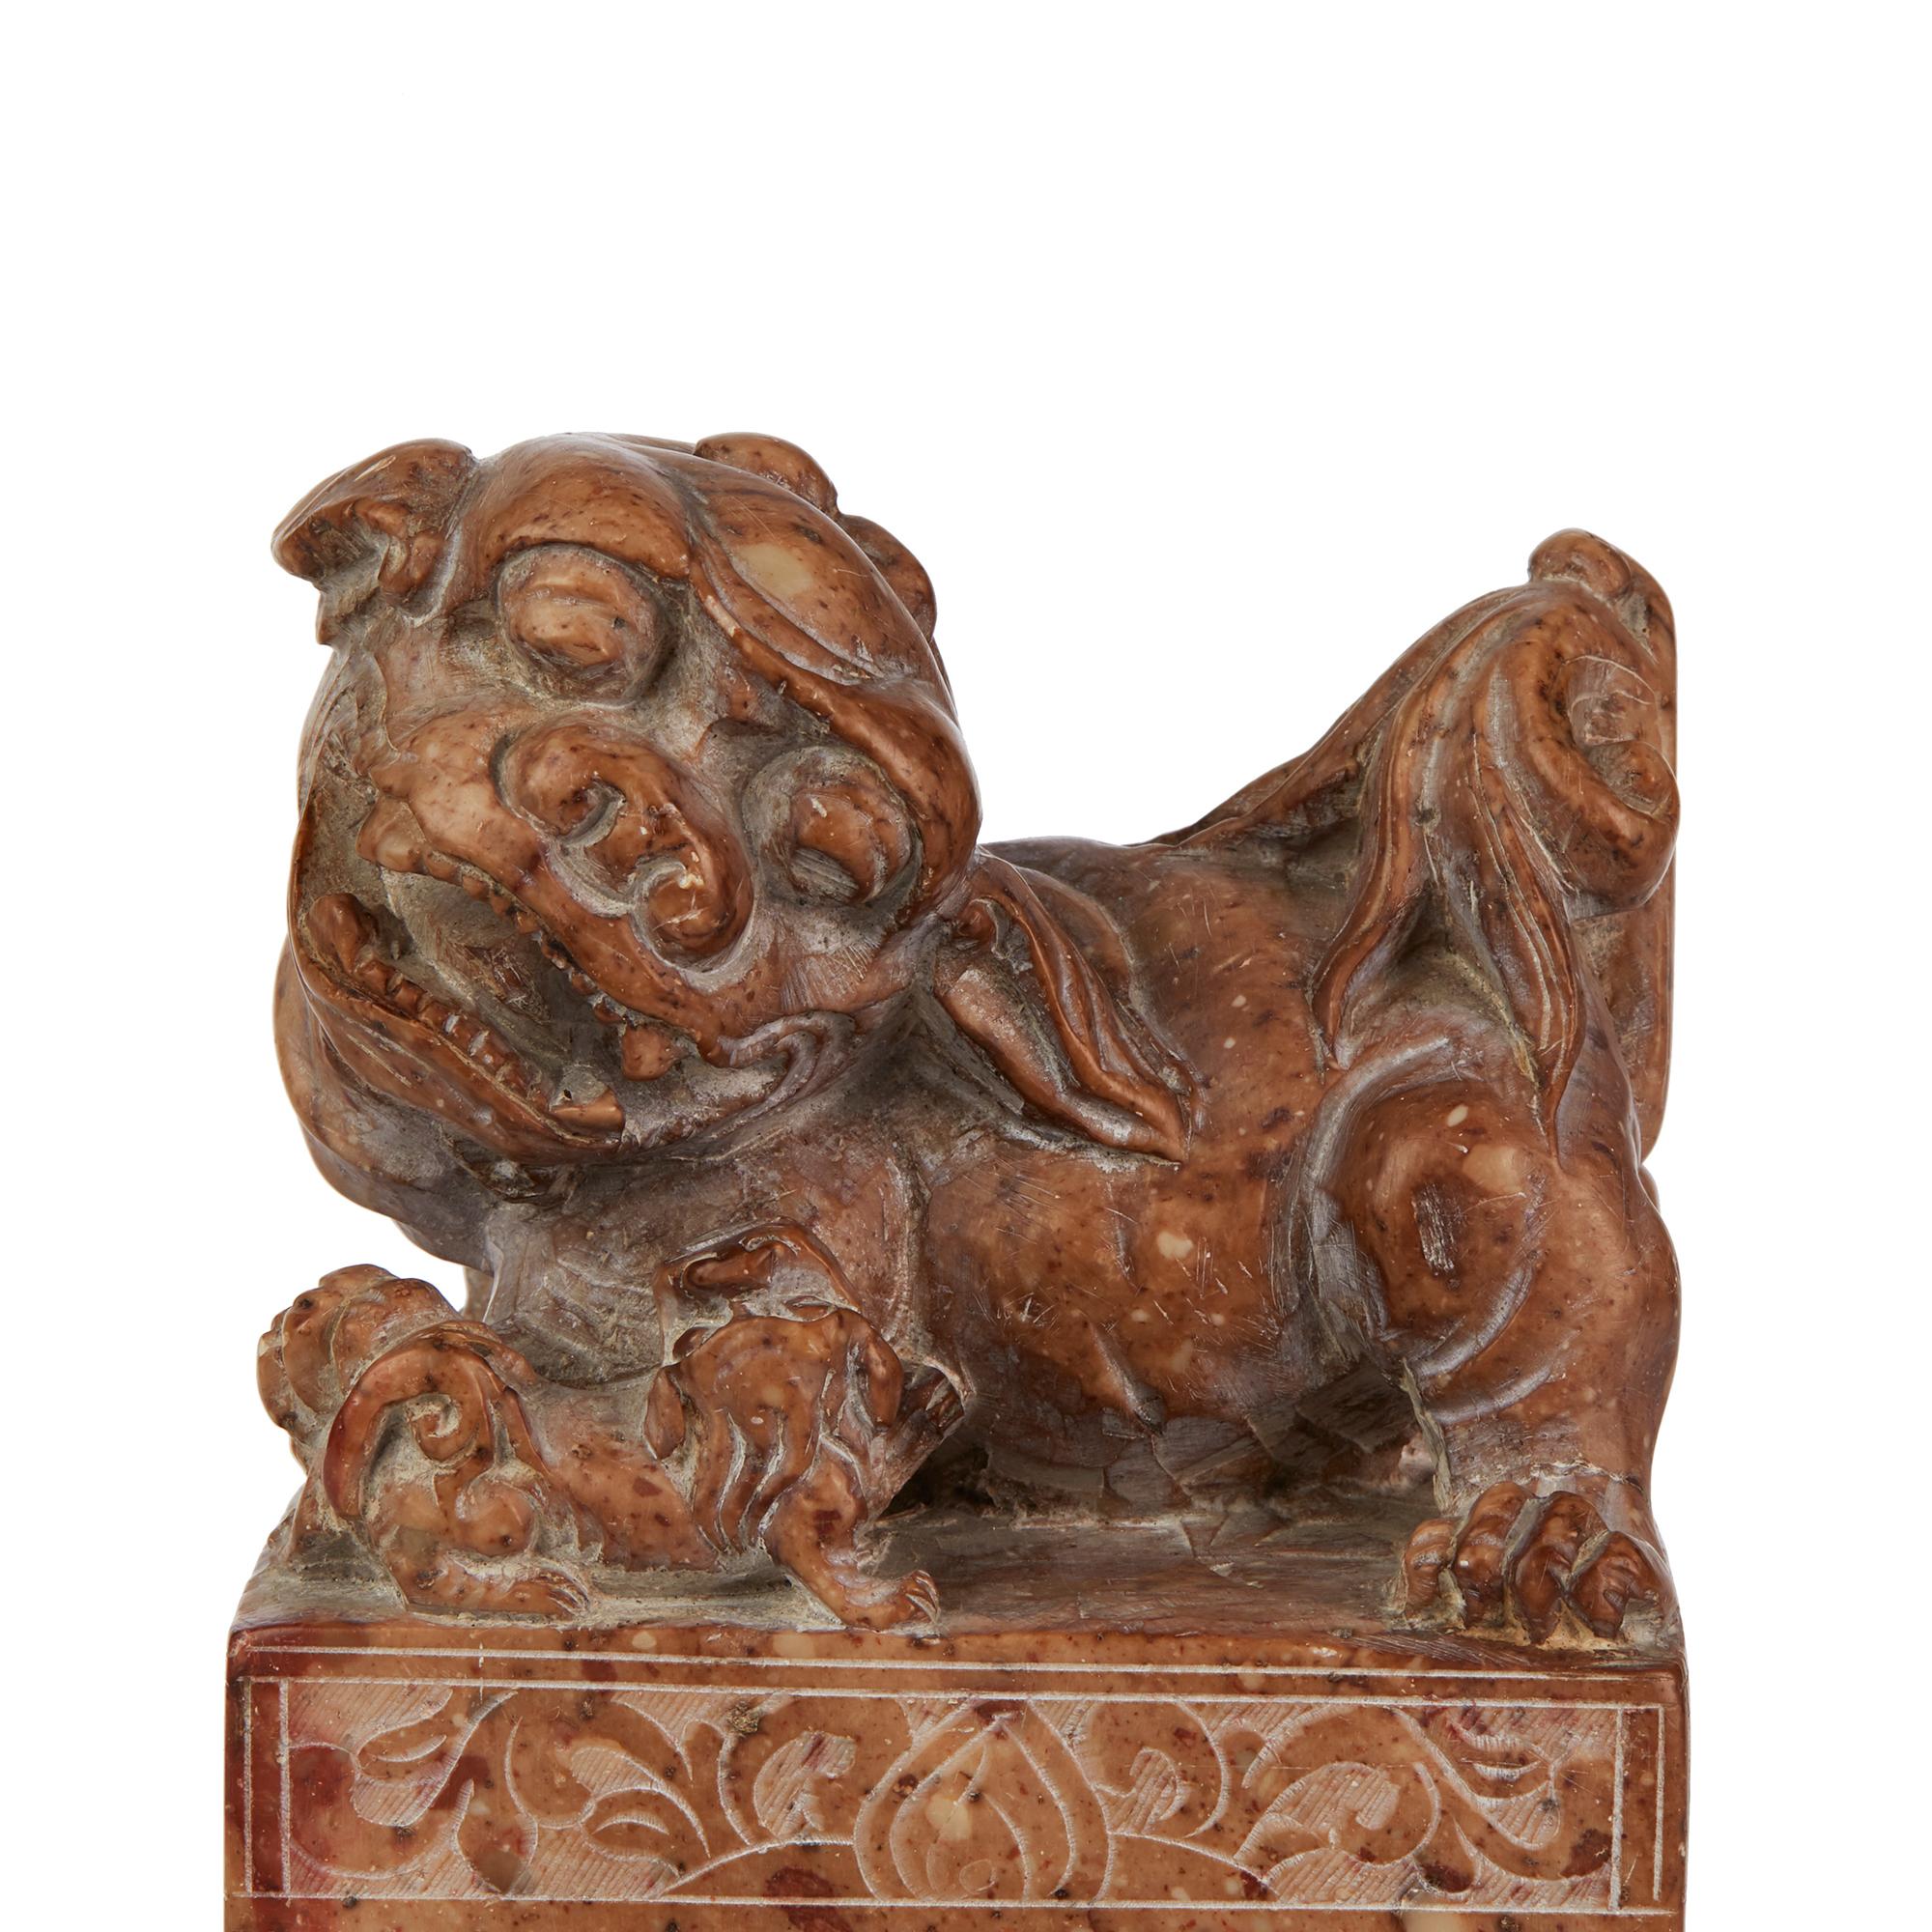 A large and well carved Chinese soap stone seal of rectangular form carved with a large dog of Fo and puppy to the top. Carved in a brown and slight rose coloured stone the body of the seal is carved with floral panels, the front with a vessel